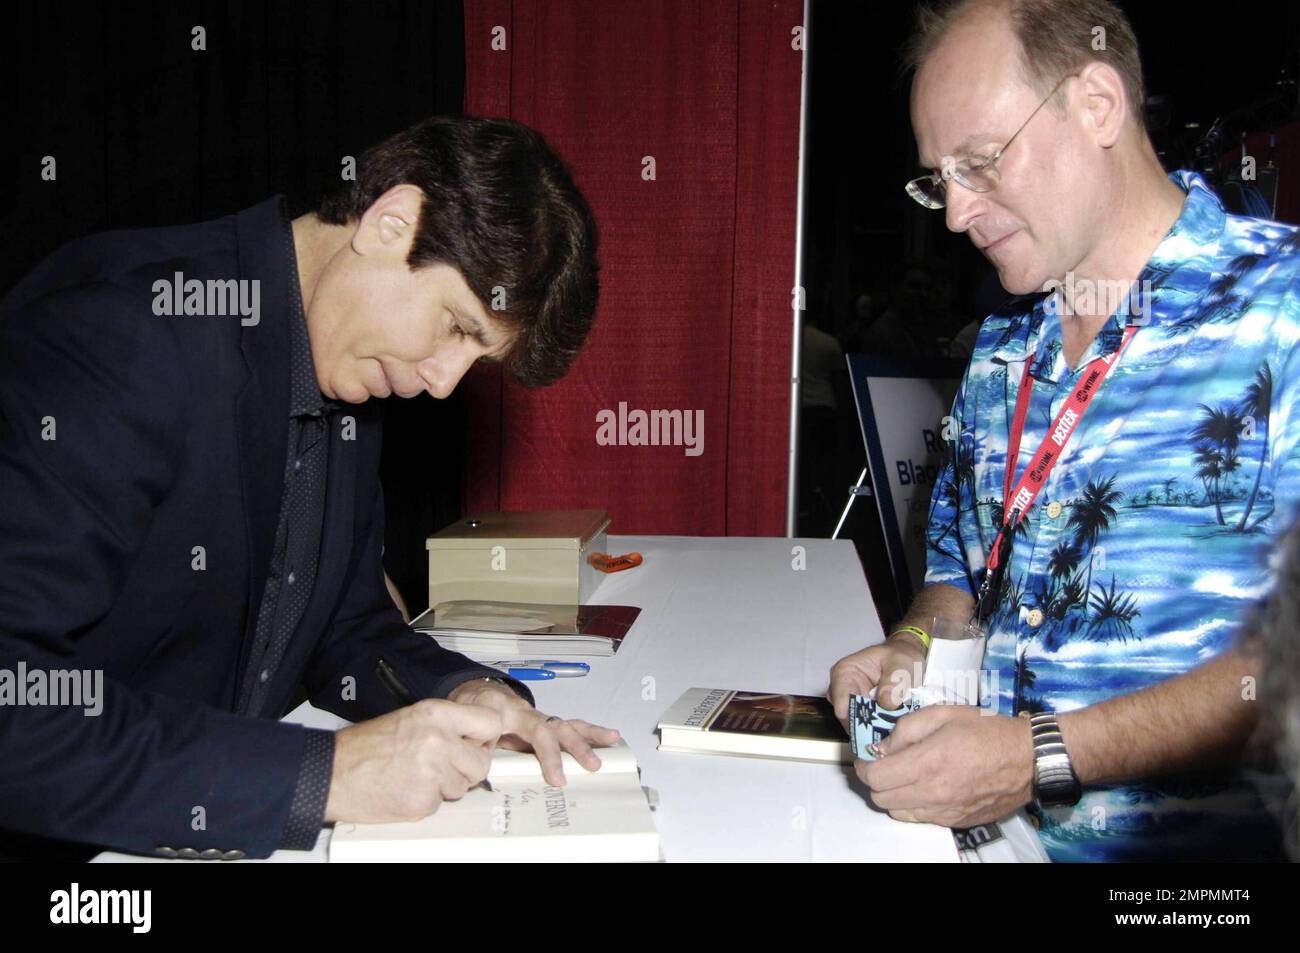 Former Illinois governor Rod Blagojevich who is currently involved in a government scandal attends Wizard World Chicago Comic Con held at The Donald E. Stephens Convention and Conference Center in Rosemont near Chicago.  Earlier this week Blagojevich was convicted by a federal jury of lying to the FBI, but was deadlocked on 23 other charges. The former governor arrived more than an hour late but drew a huge crowd of supporters and detractors.  Blagojevich visited the booths of actors Adam West, Richard Roundtree and John Schneider before setting at his own where he charged $80 for each photo t Stock Photo